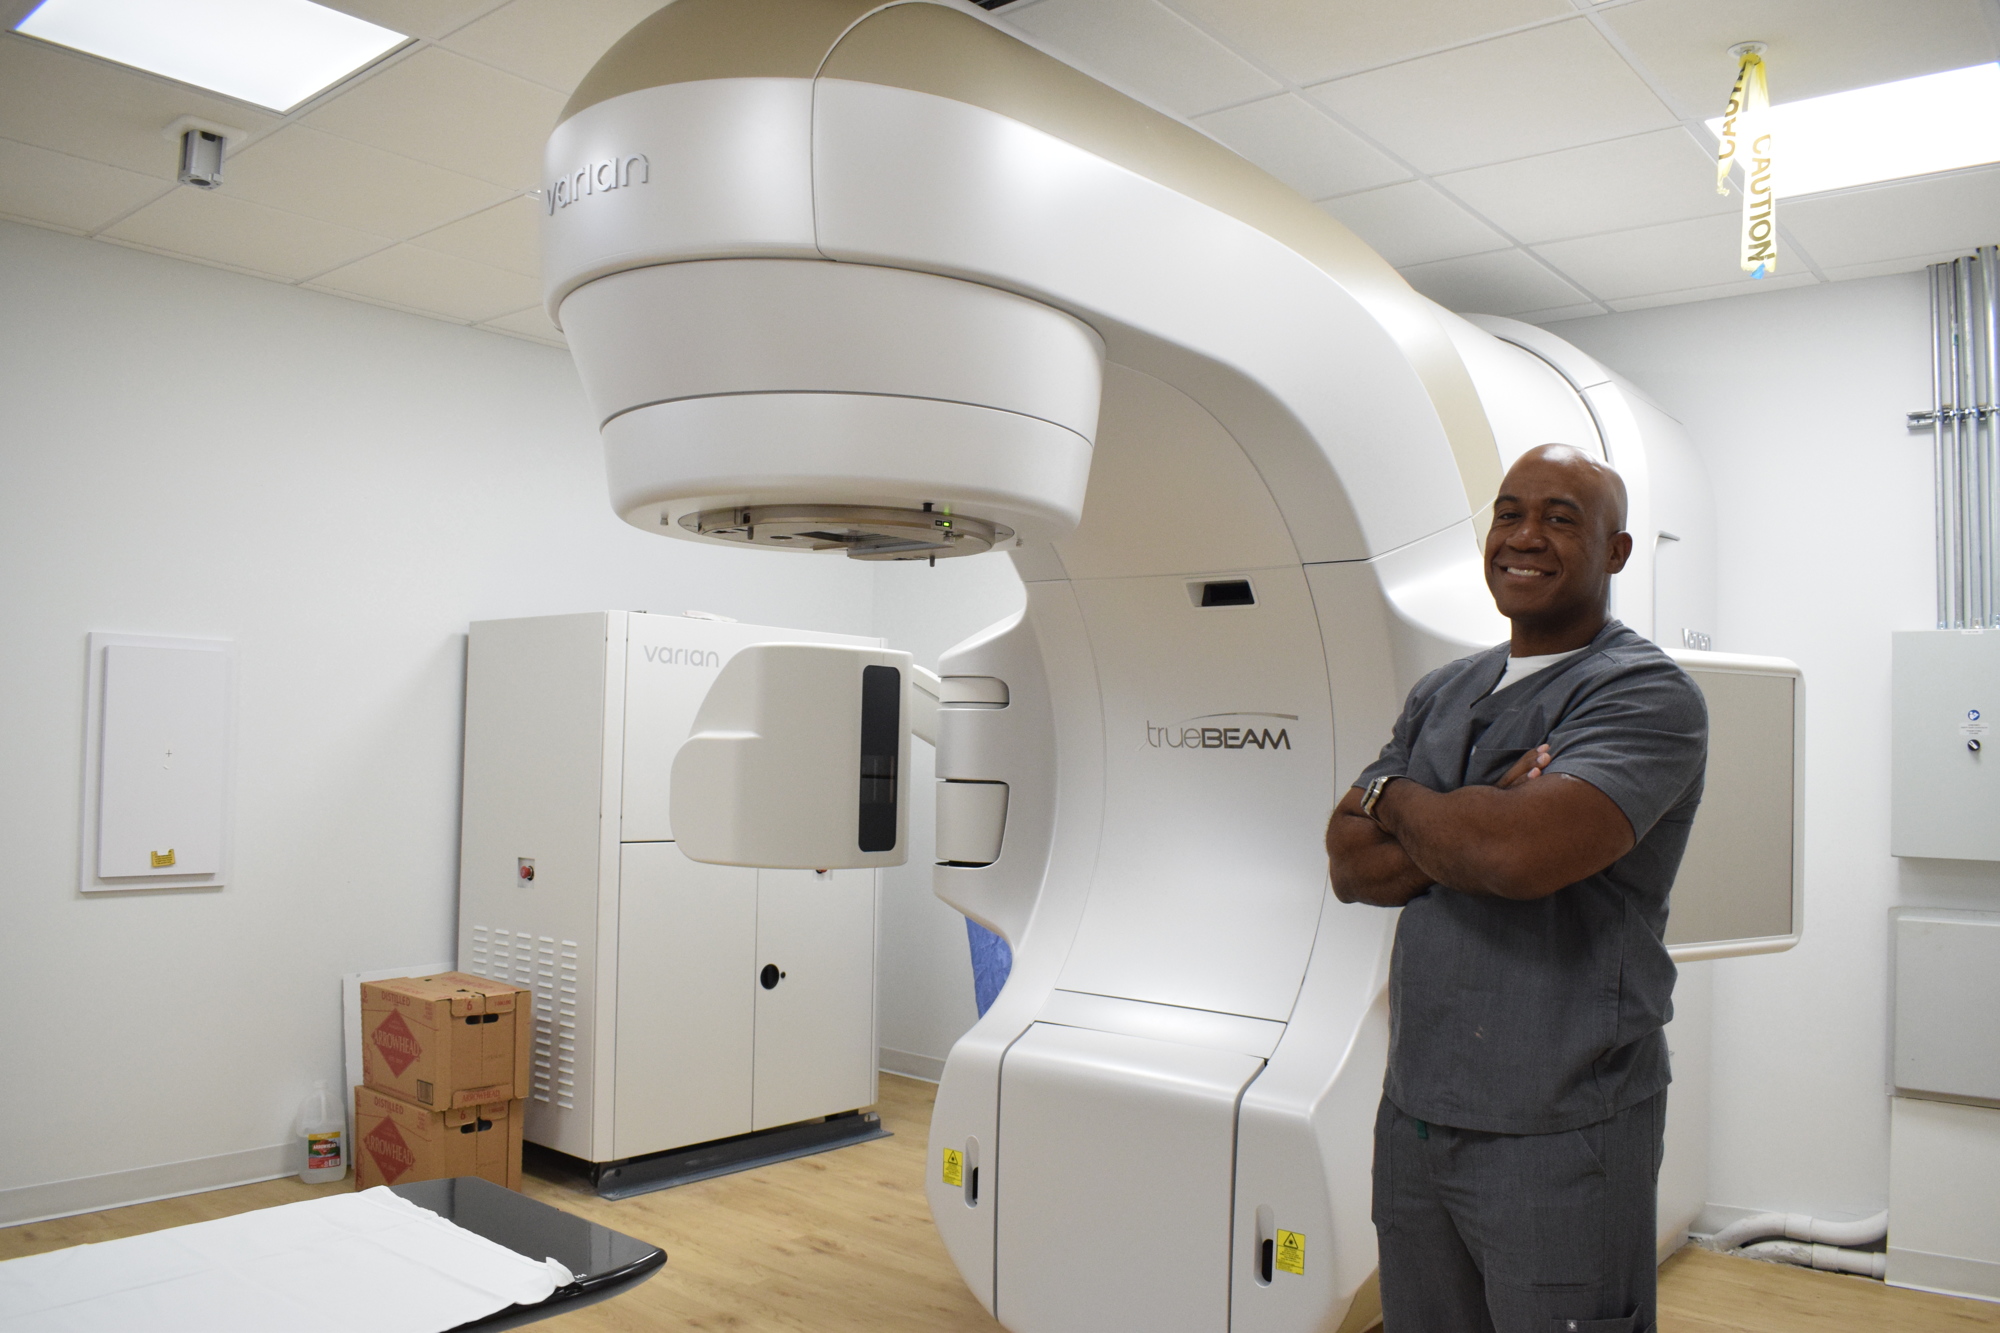 Dr. Dwight Fitch uses state-of-the-art technology to treat patients who have cancer. The technology helps Fitch provide radiation in a more accurate, safer and quicker way.